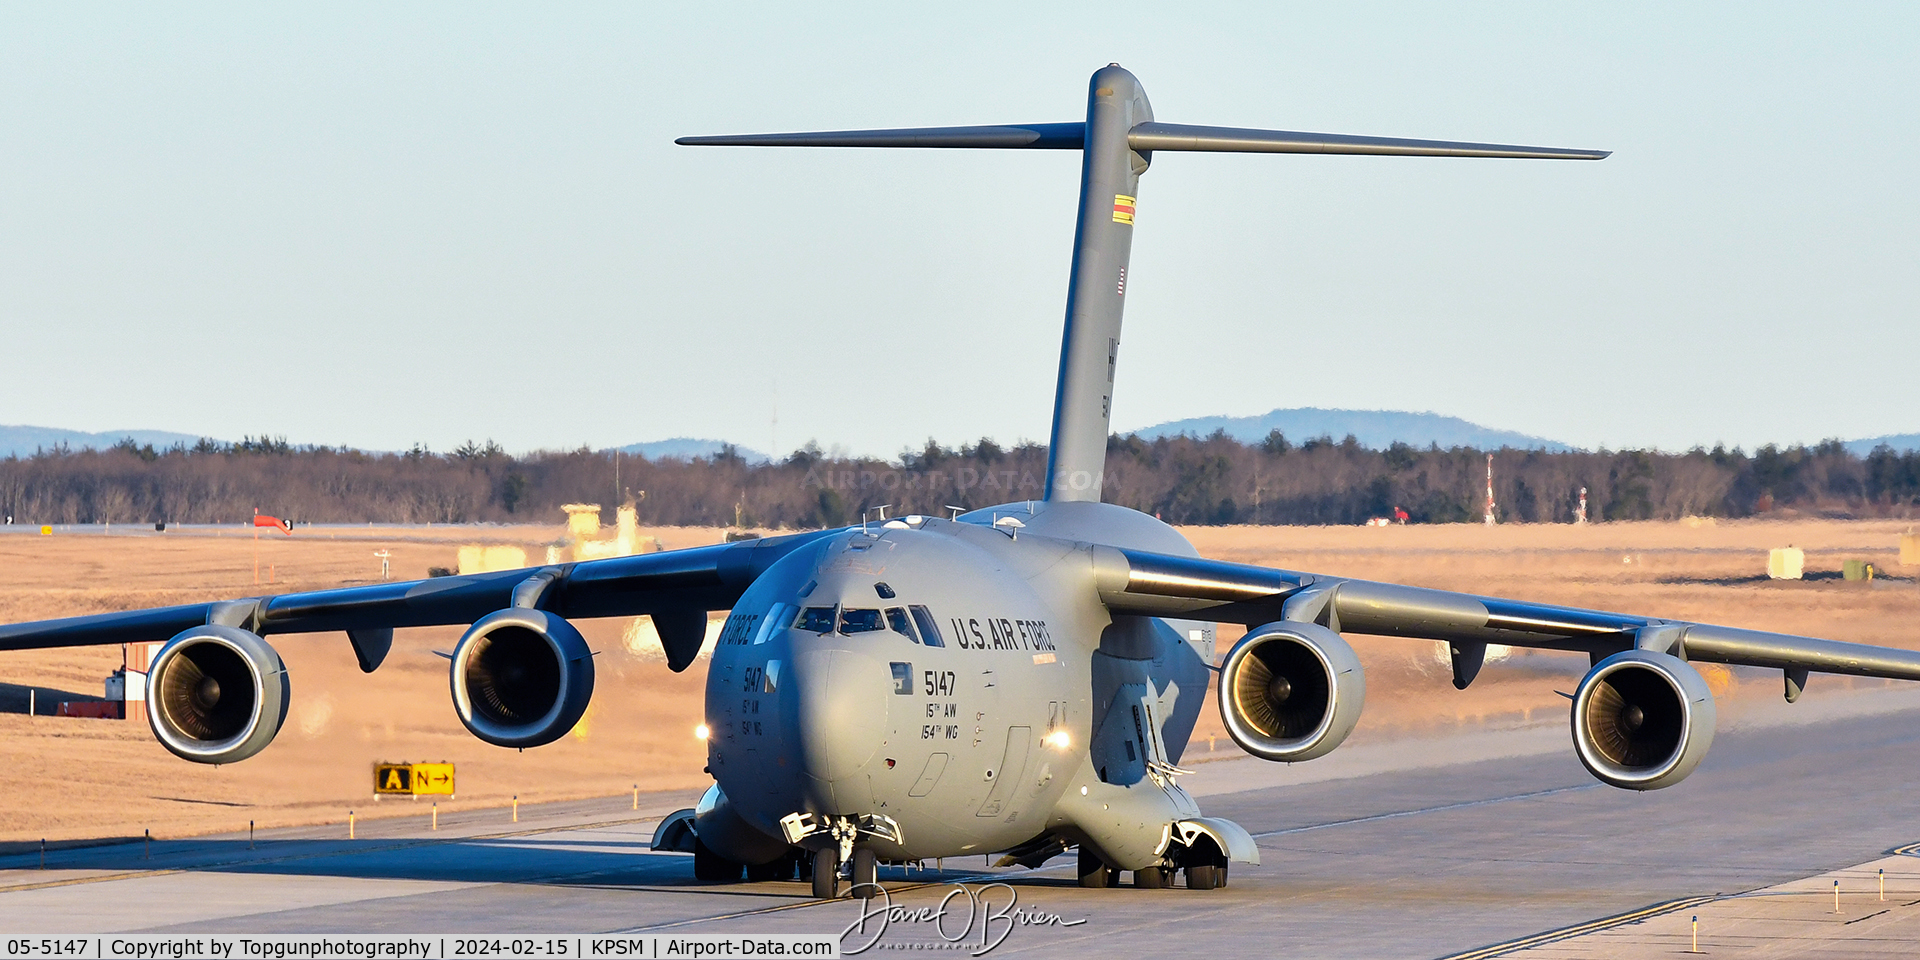 05-5147, 2005 Boeing C-17A Globemaster III C/N P-147, REACH798 taxiing up to head to Ramstein AFB